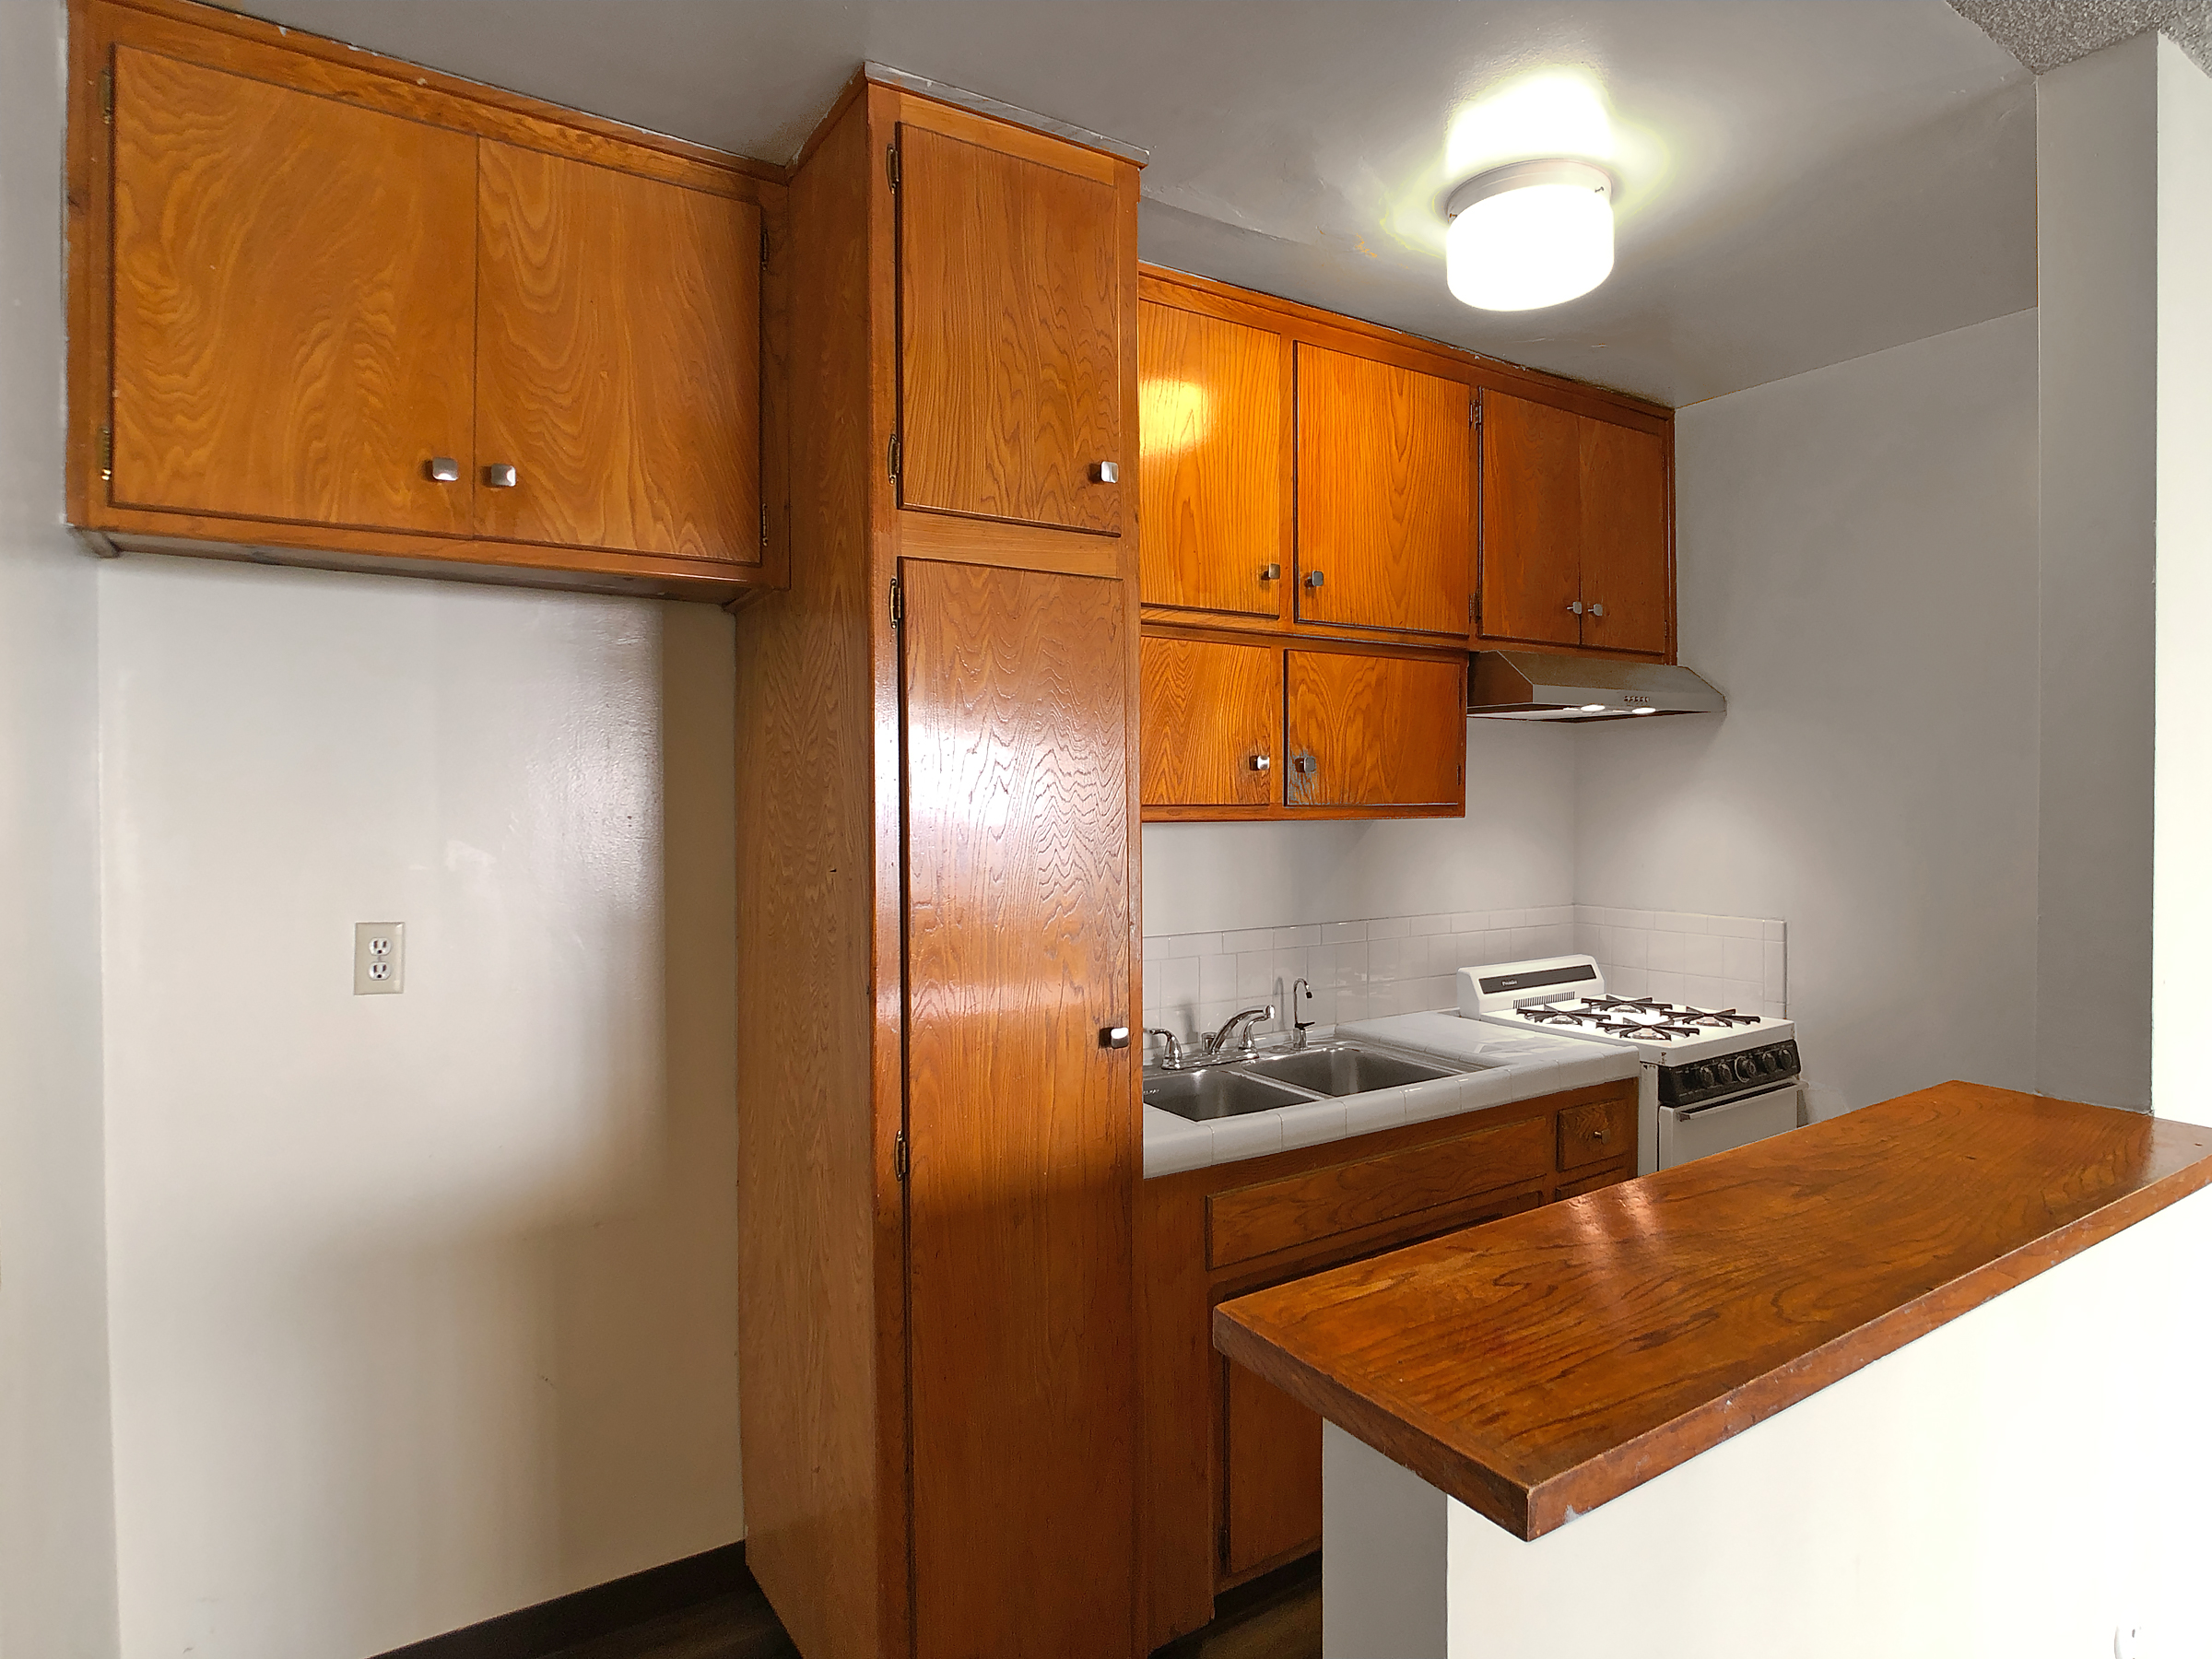 Photo of kitchen showing sink, kitchen cabinets, sink, countertop, stove and empty space for fridge